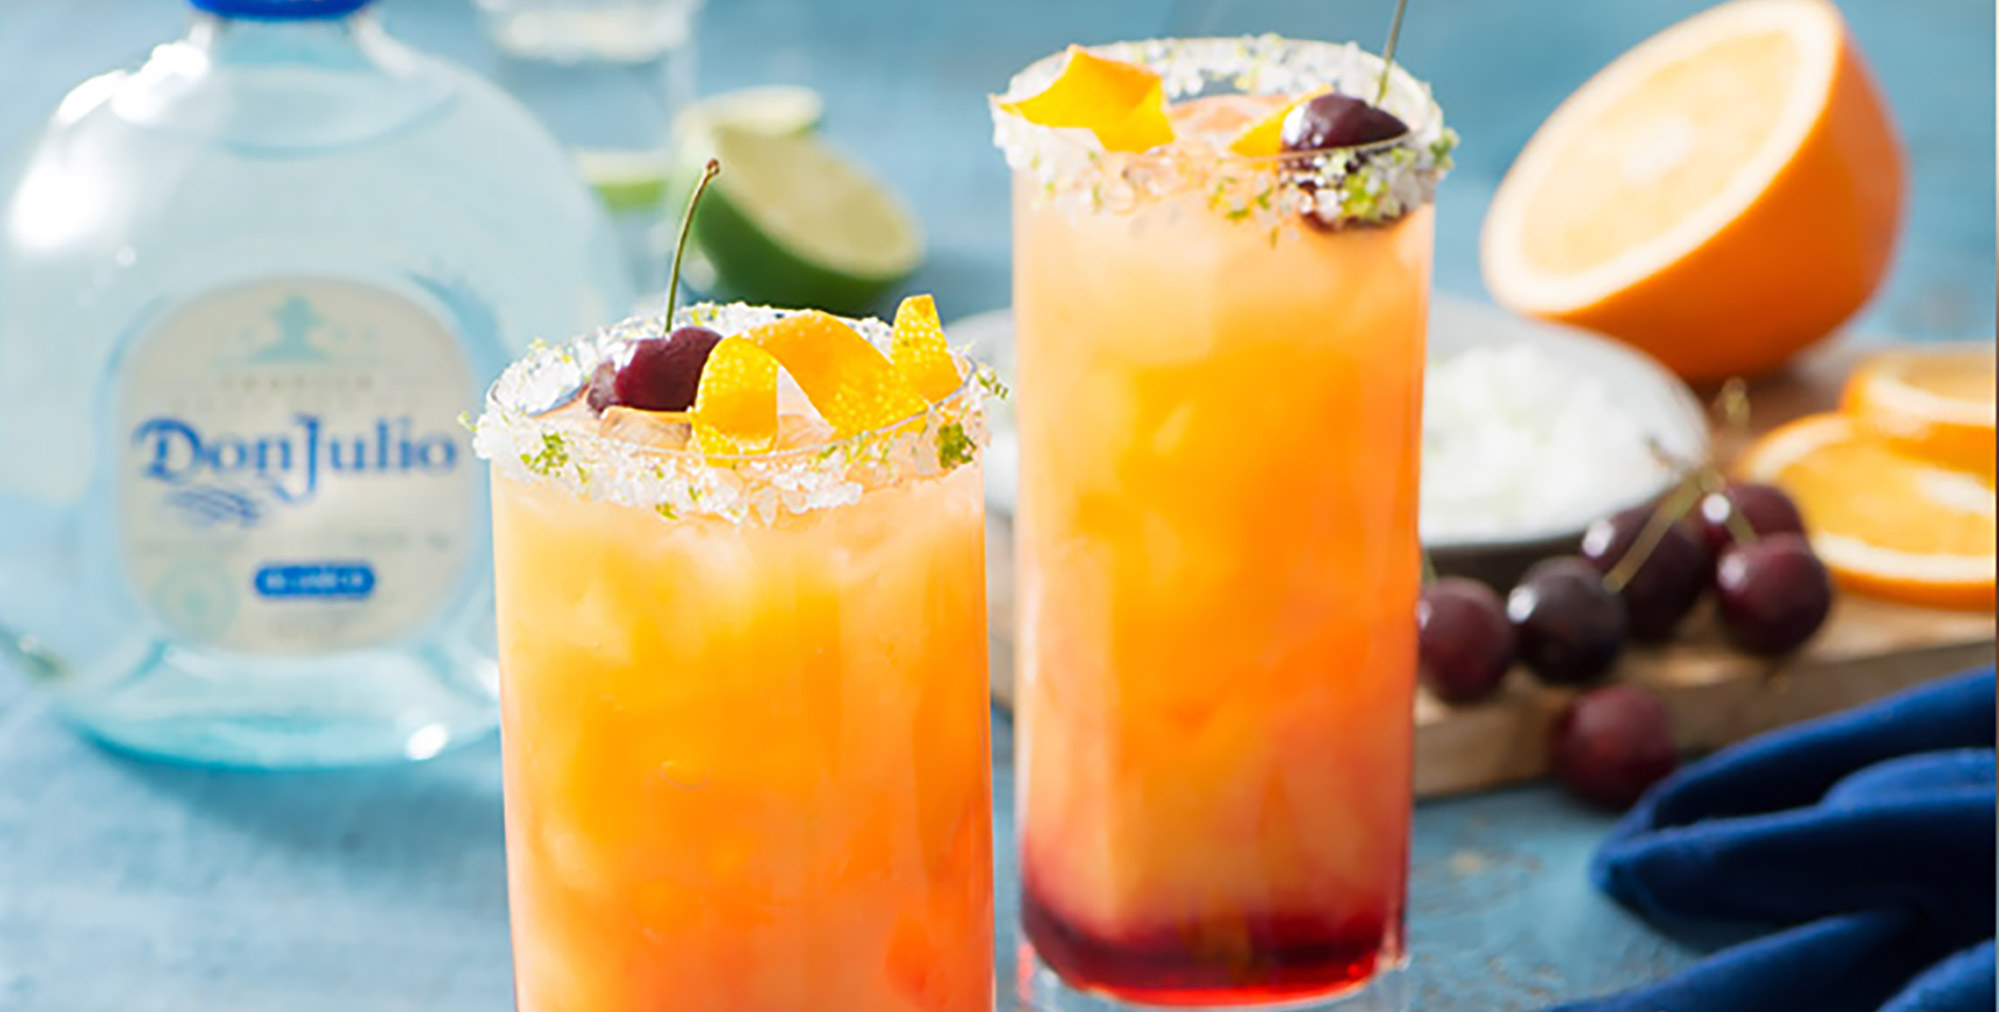 Tequila Sunrise drink made with Don Julio Blanco Tequila